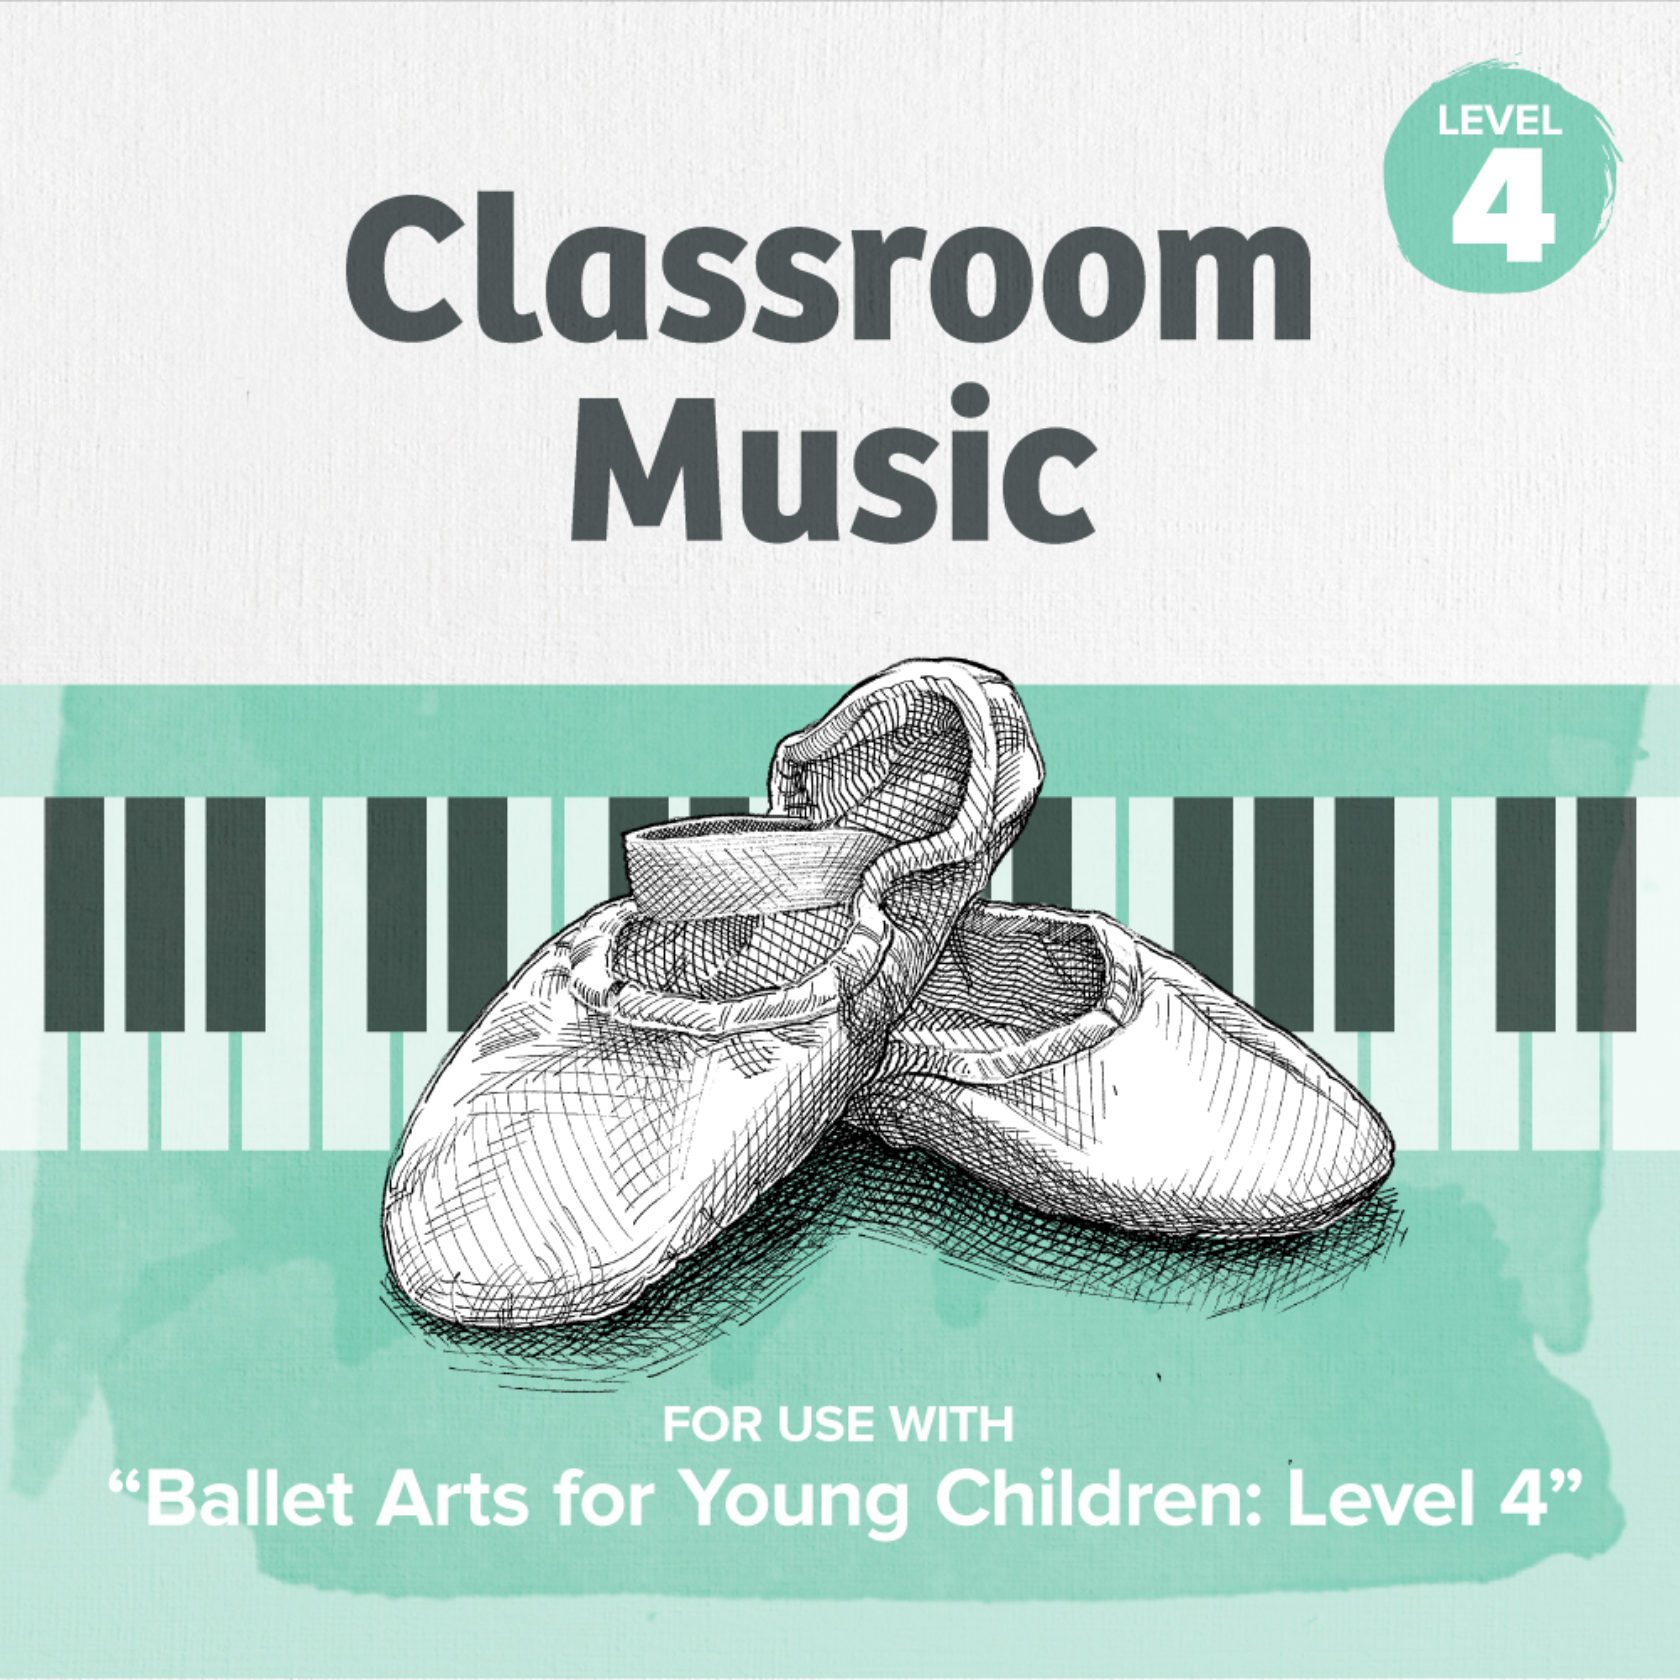 Music for Level 4 (Ages 7-10)